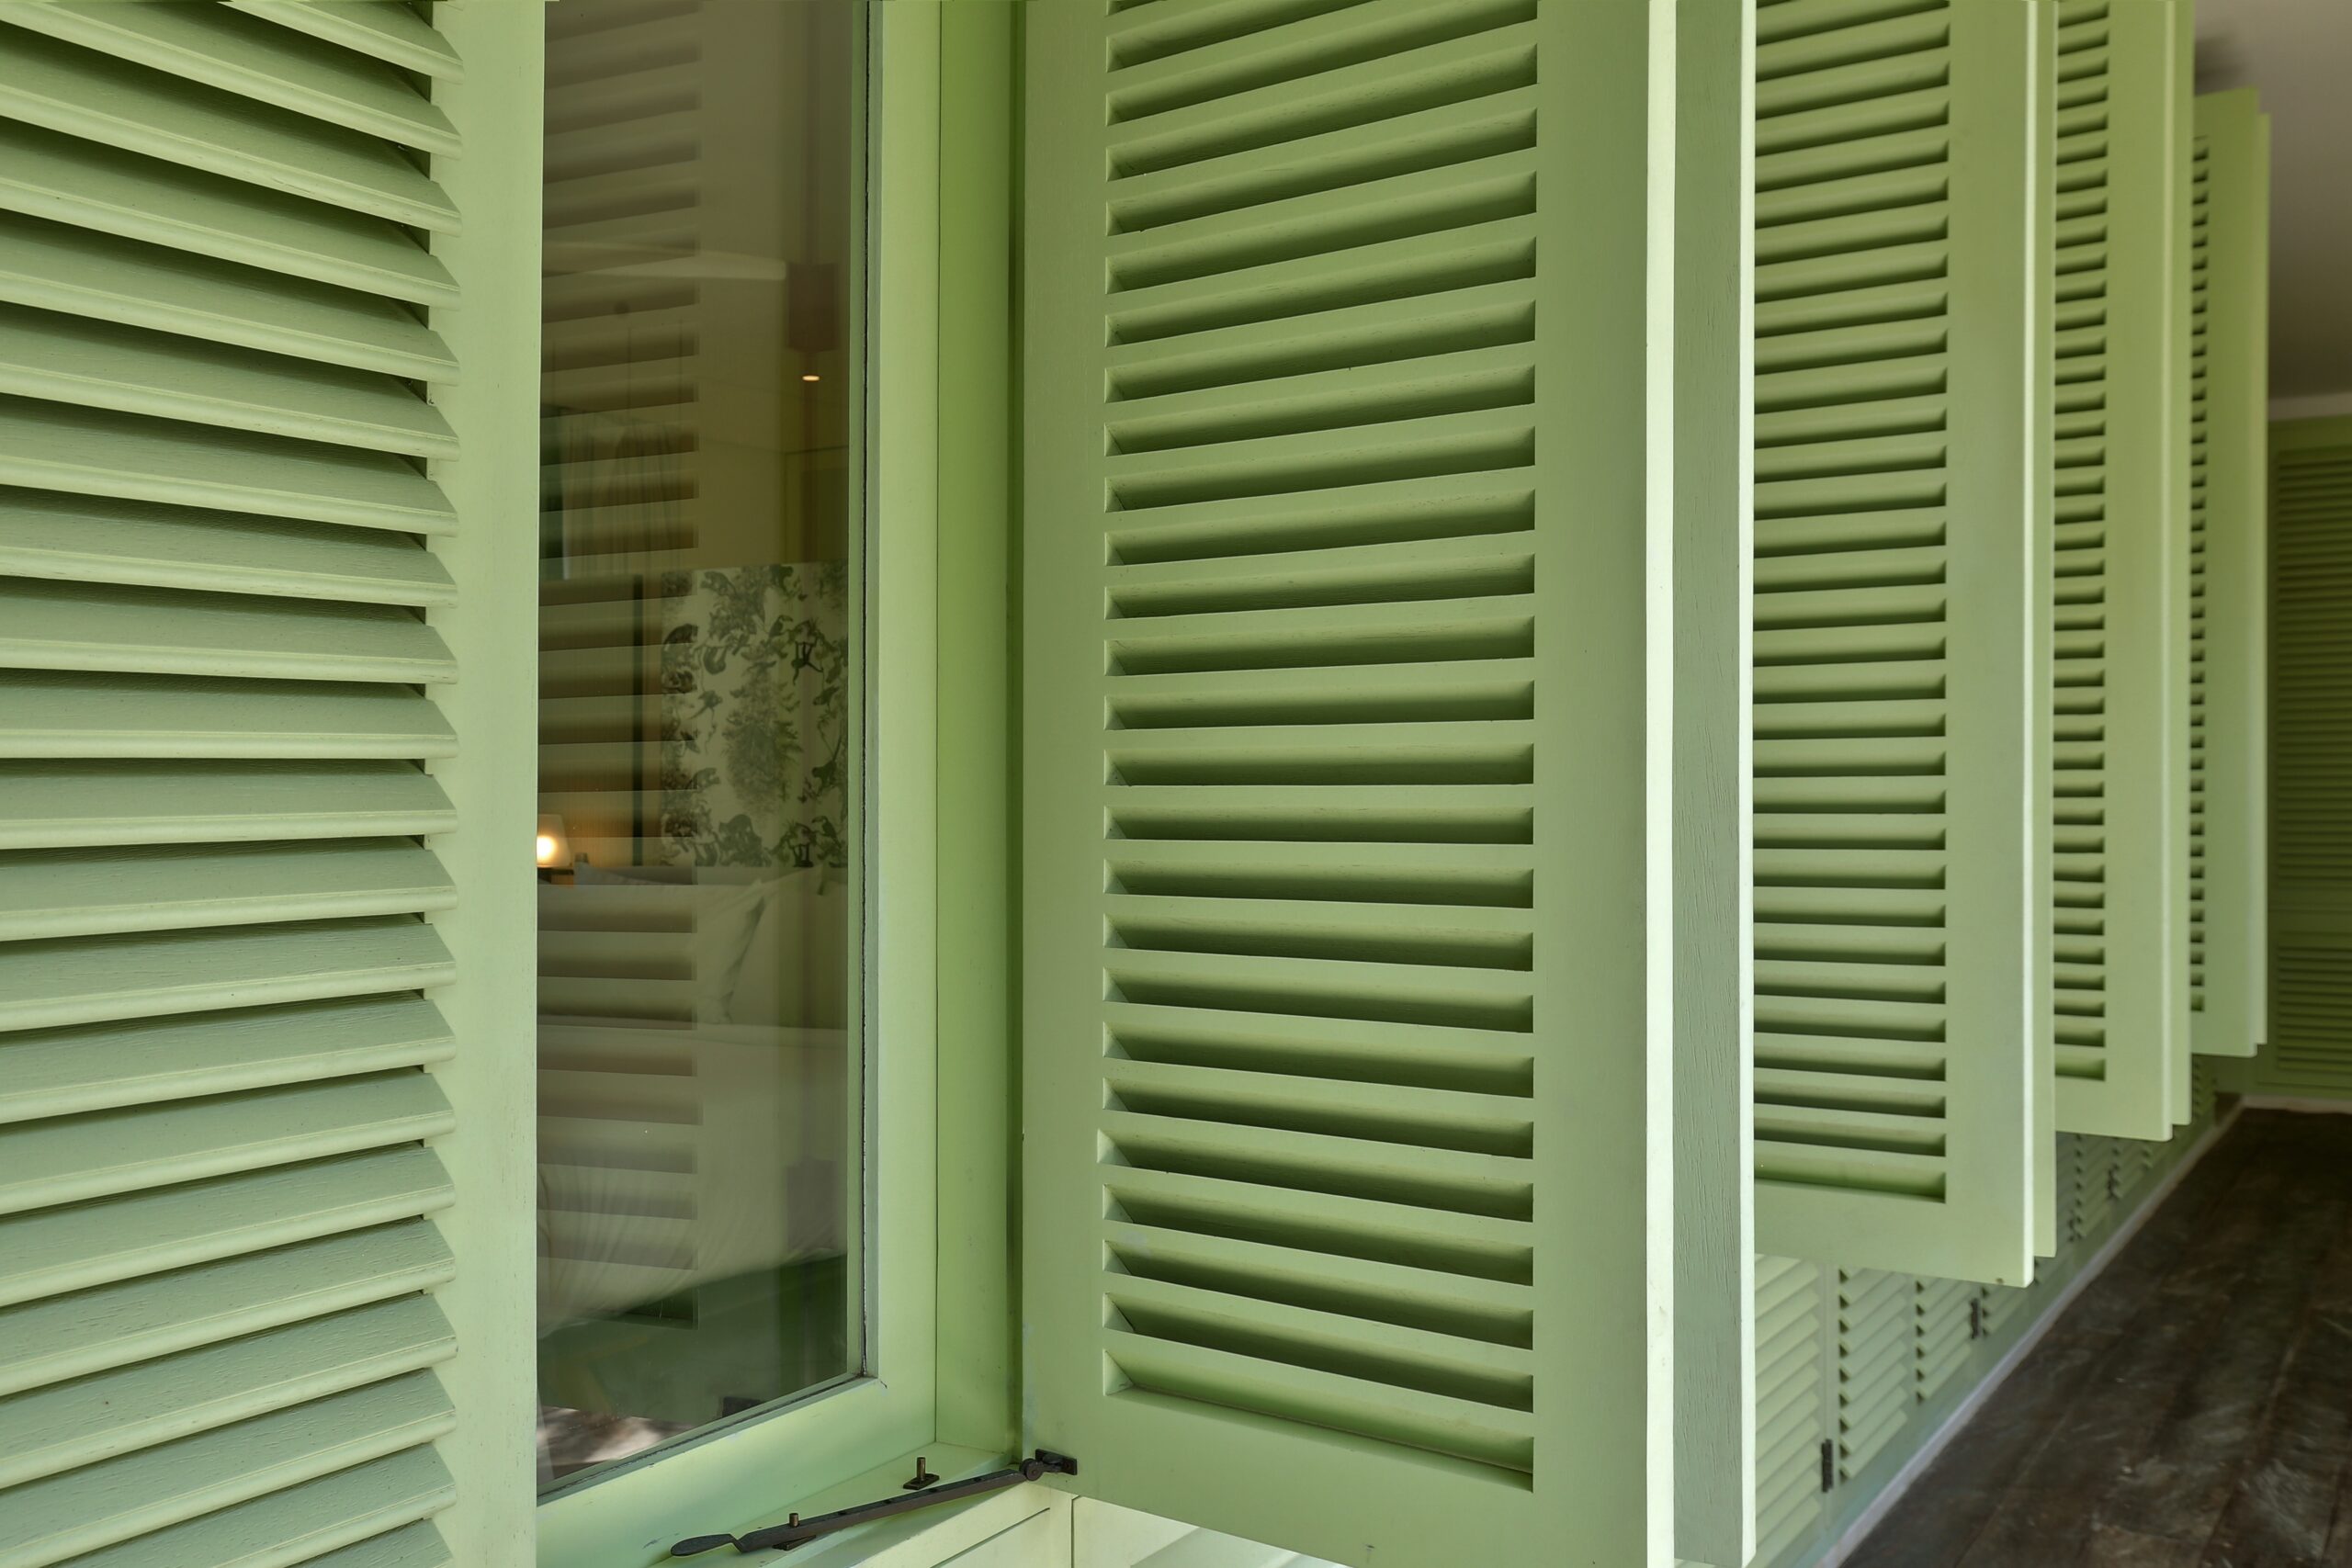 Aluminium Shutters For Home Security And Privacy